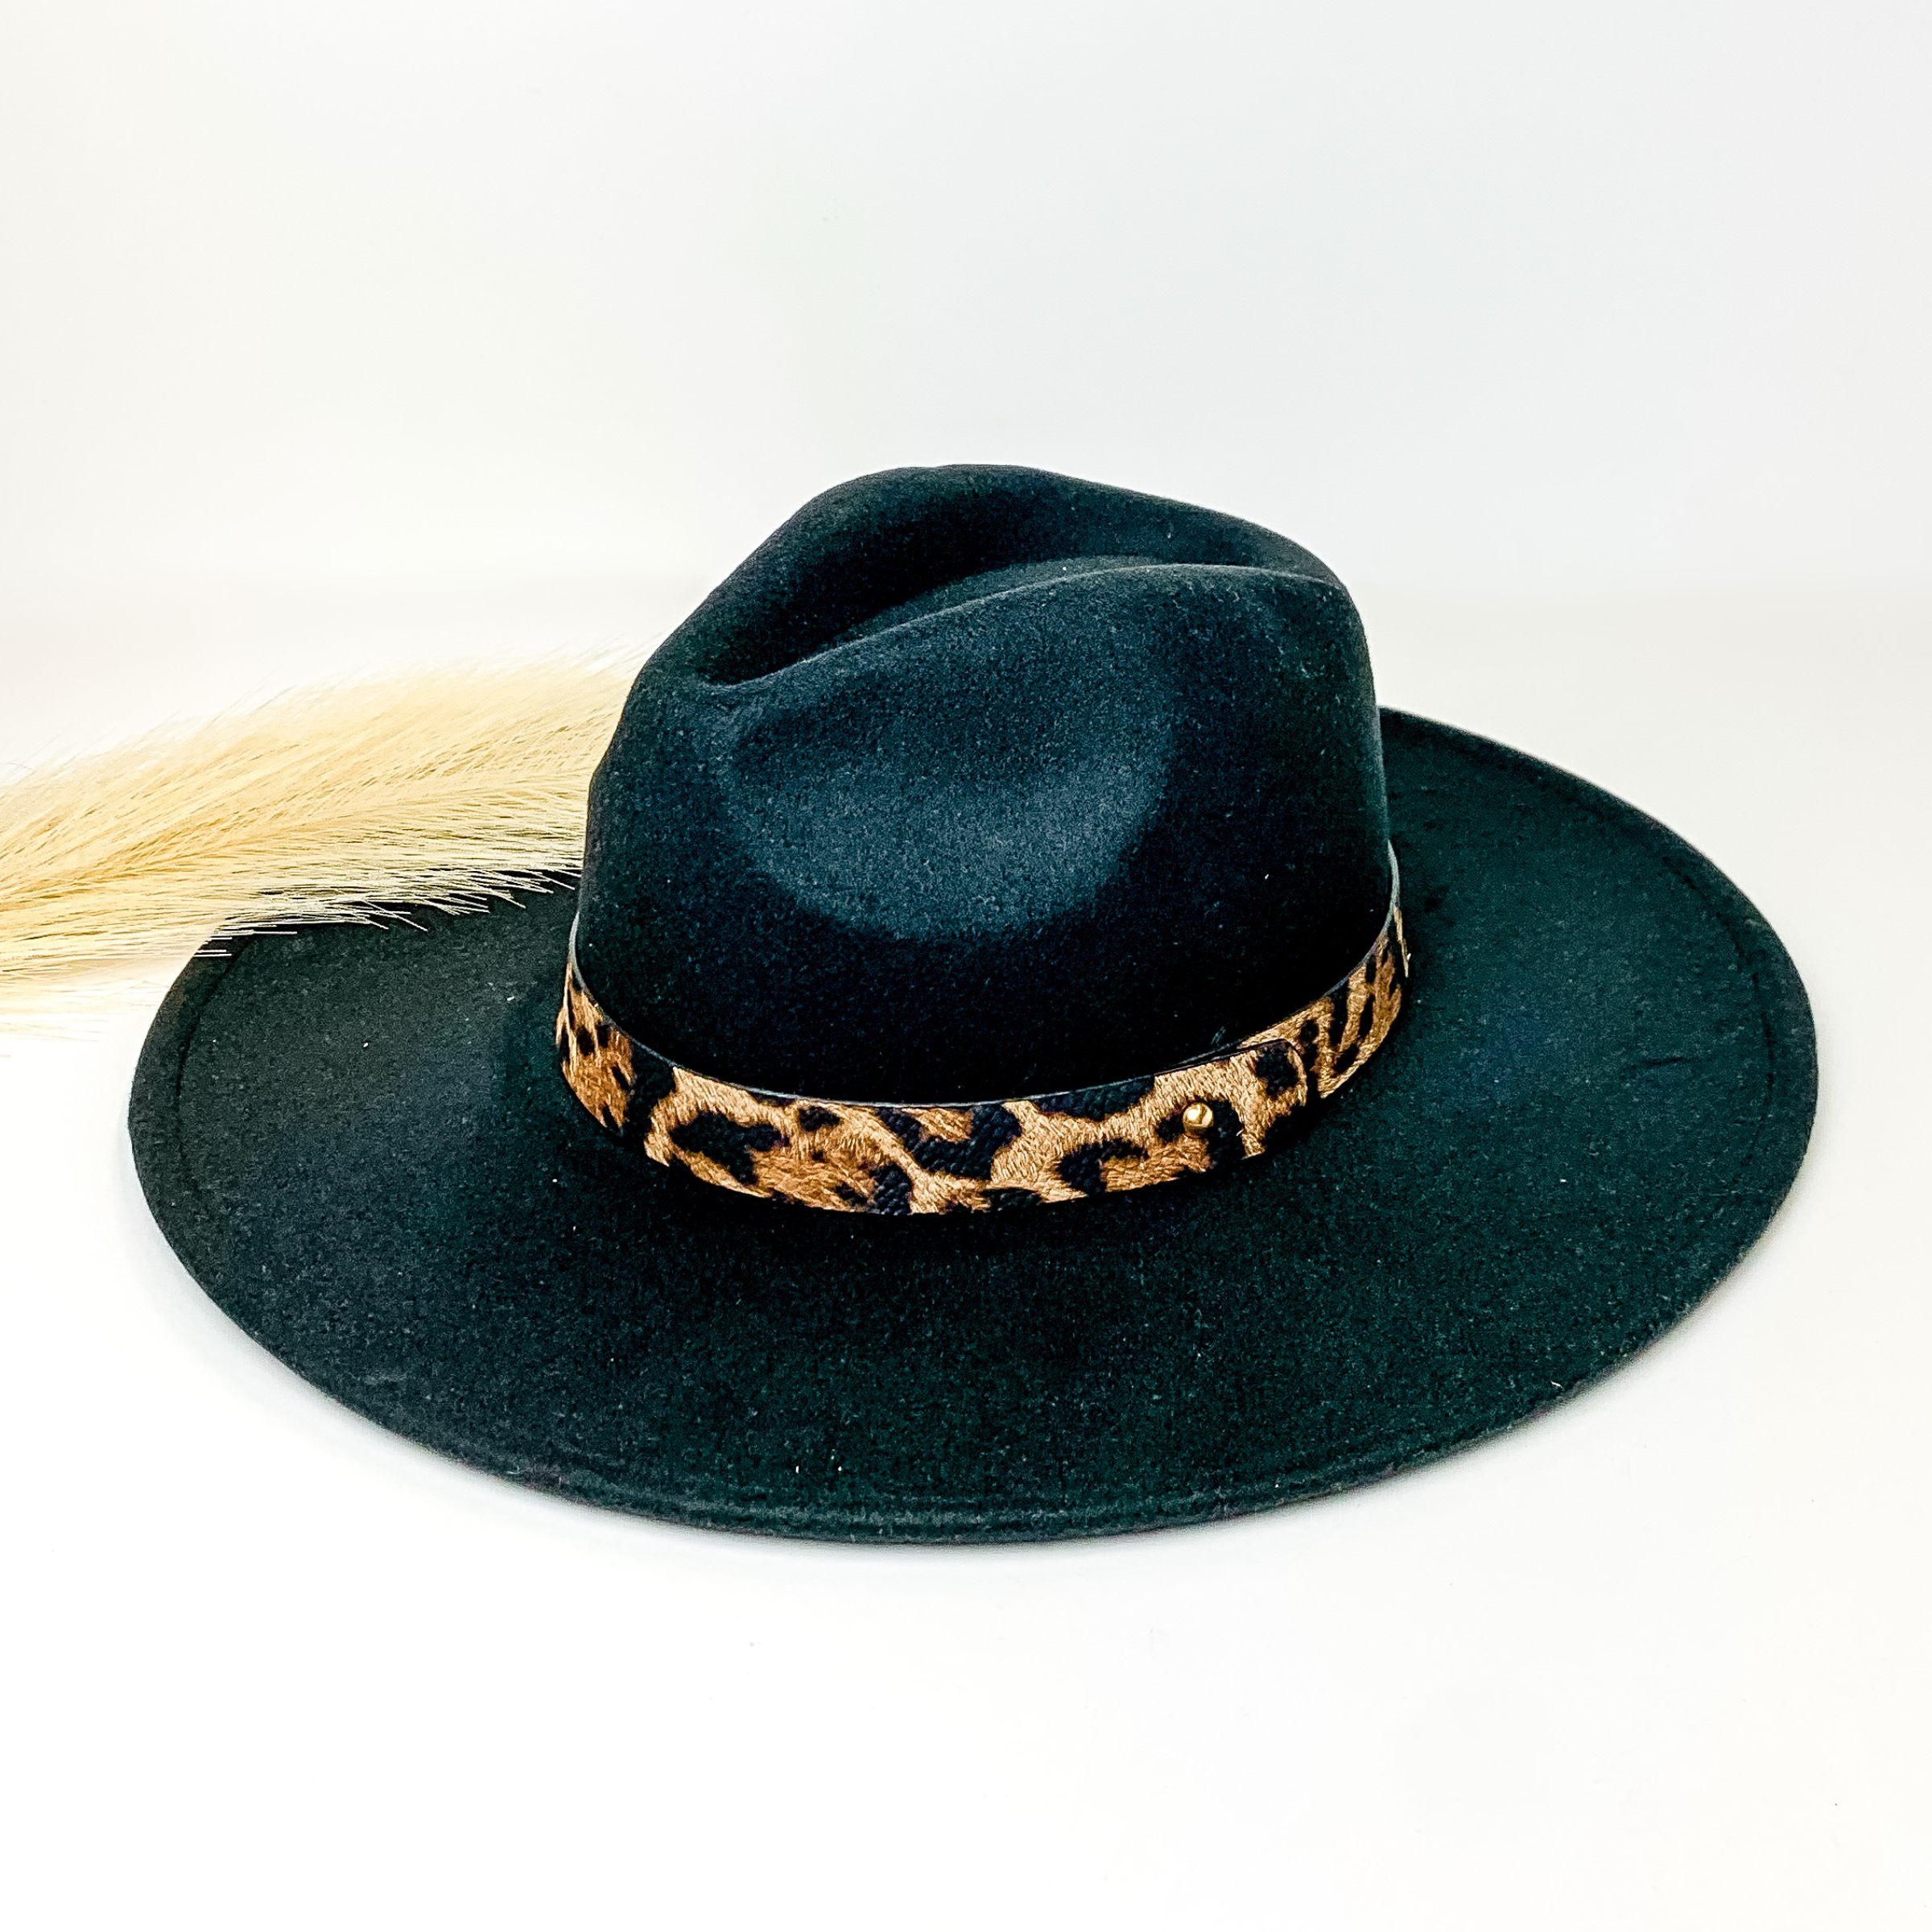 Black flat brim hat with a leopard print hat bad around the crown. This hat is pictured on a white background with ivory pompous grass laying partially on the brim.